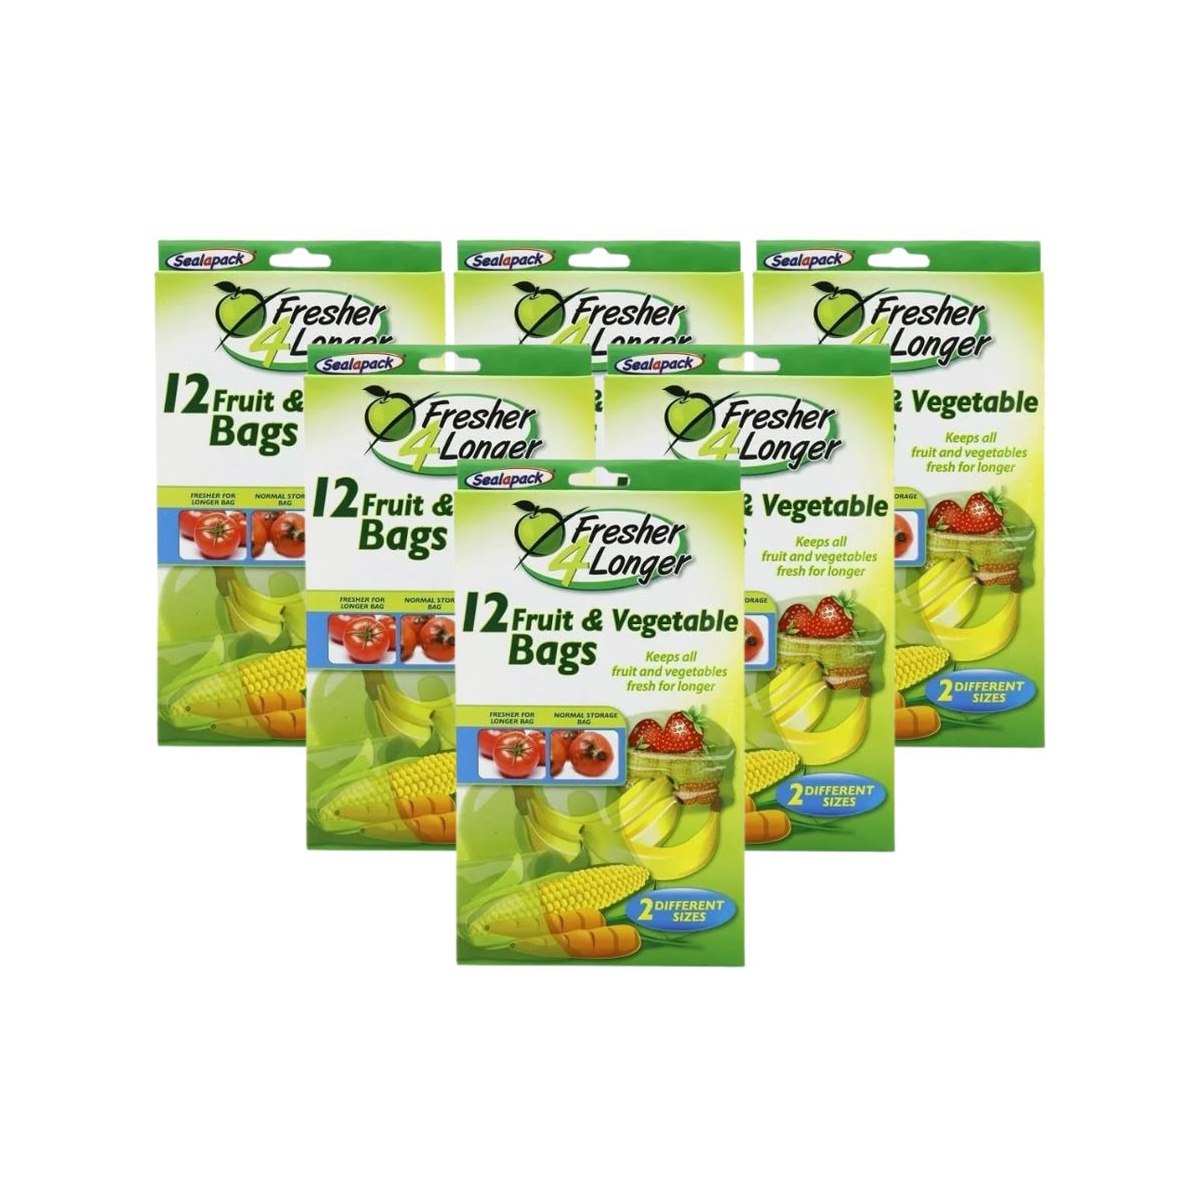 Case of 6 x Fresher for Longer Fruit and Vegetable Bags x 12